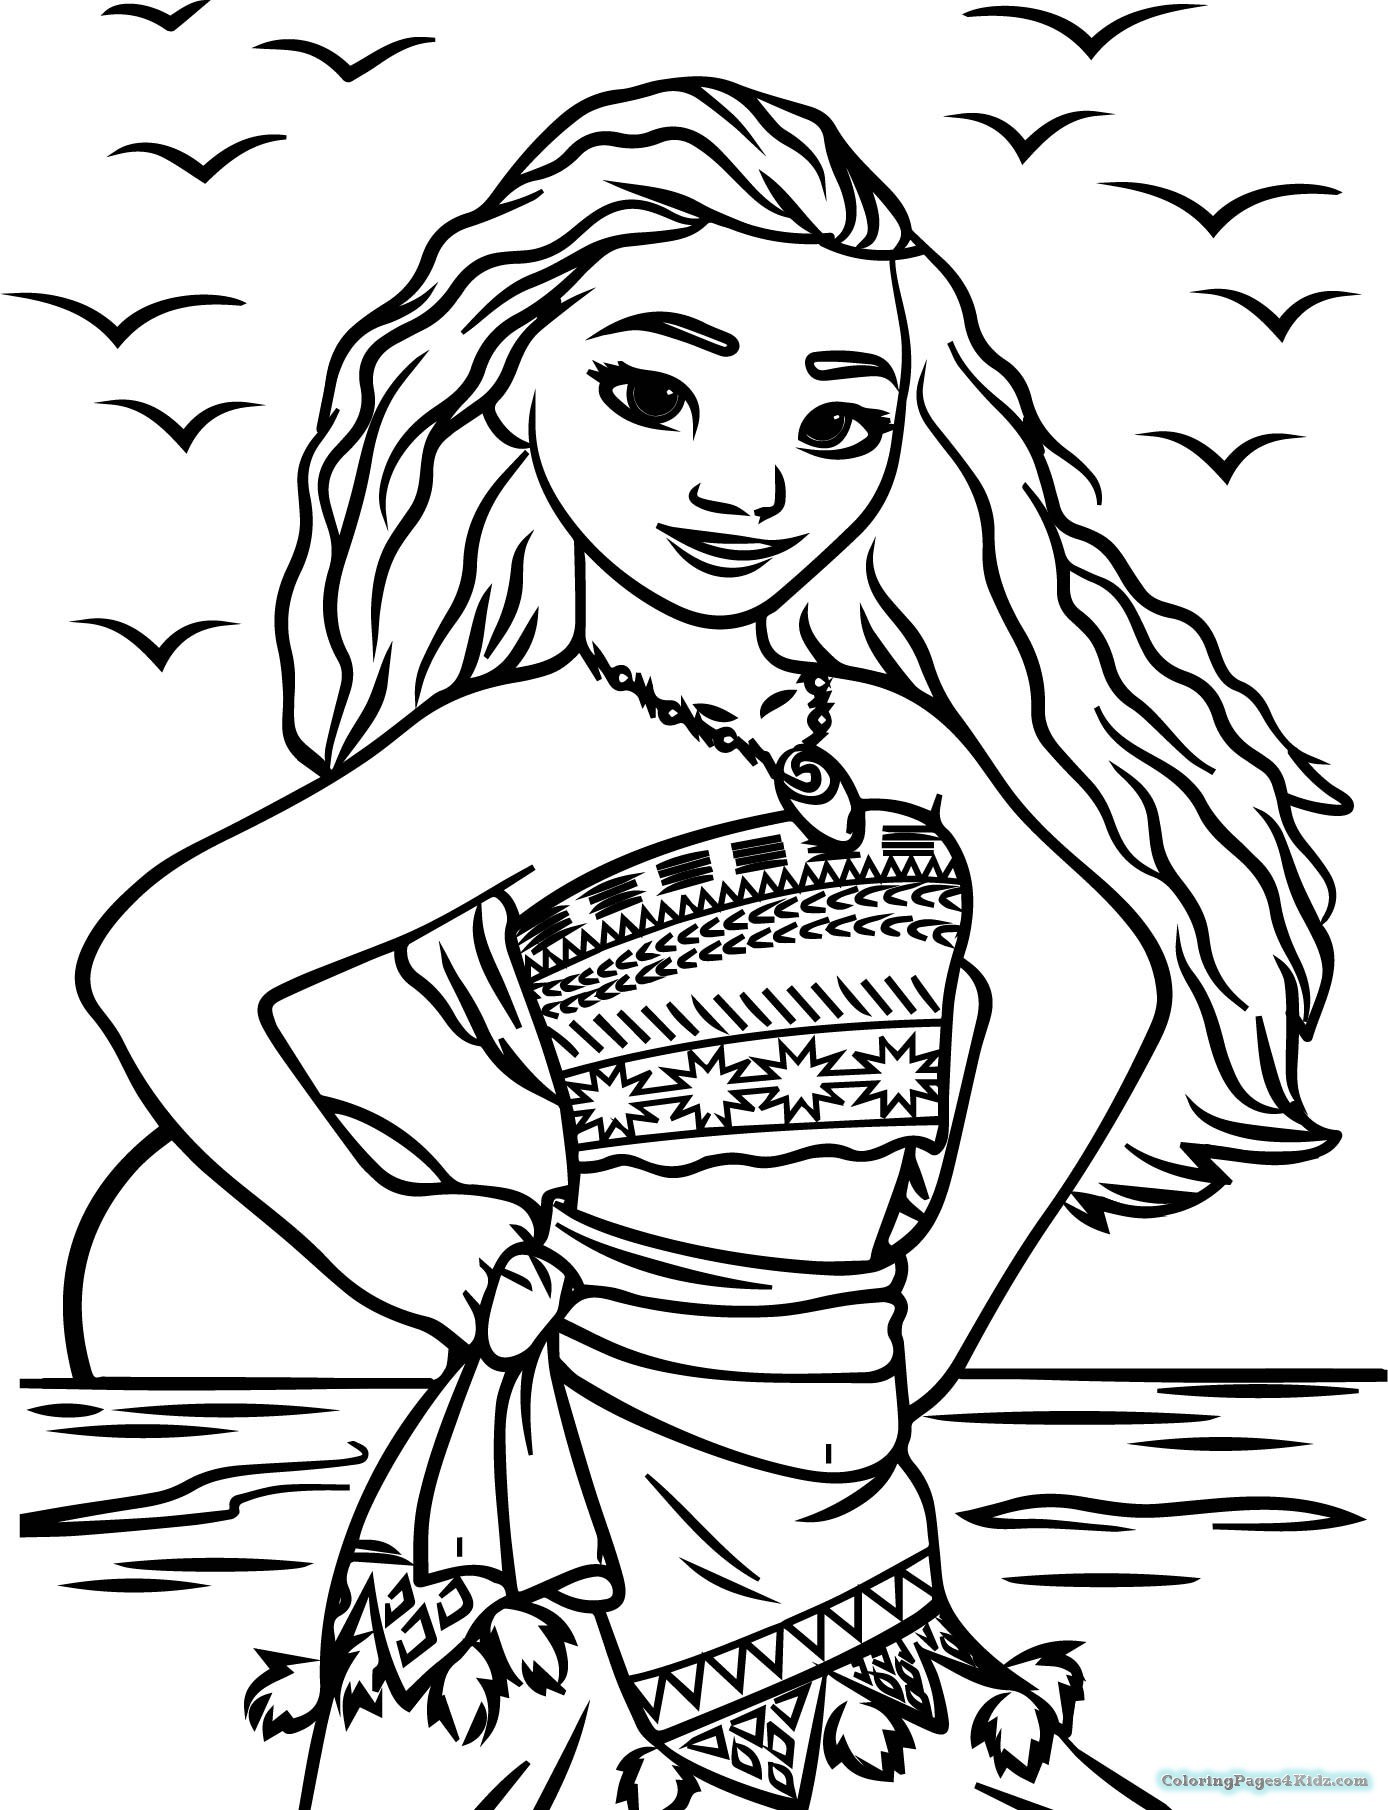 coloring book ~ Coloring Sheetsor Girls Image Inspirations Book Gritty Wnba  Basketball Eastree Sports At Pages 61 Coloring Sheets For Girls Image  Inspirations. Printable Coloring Sheets For Kids. Coloring Sheets For Girls